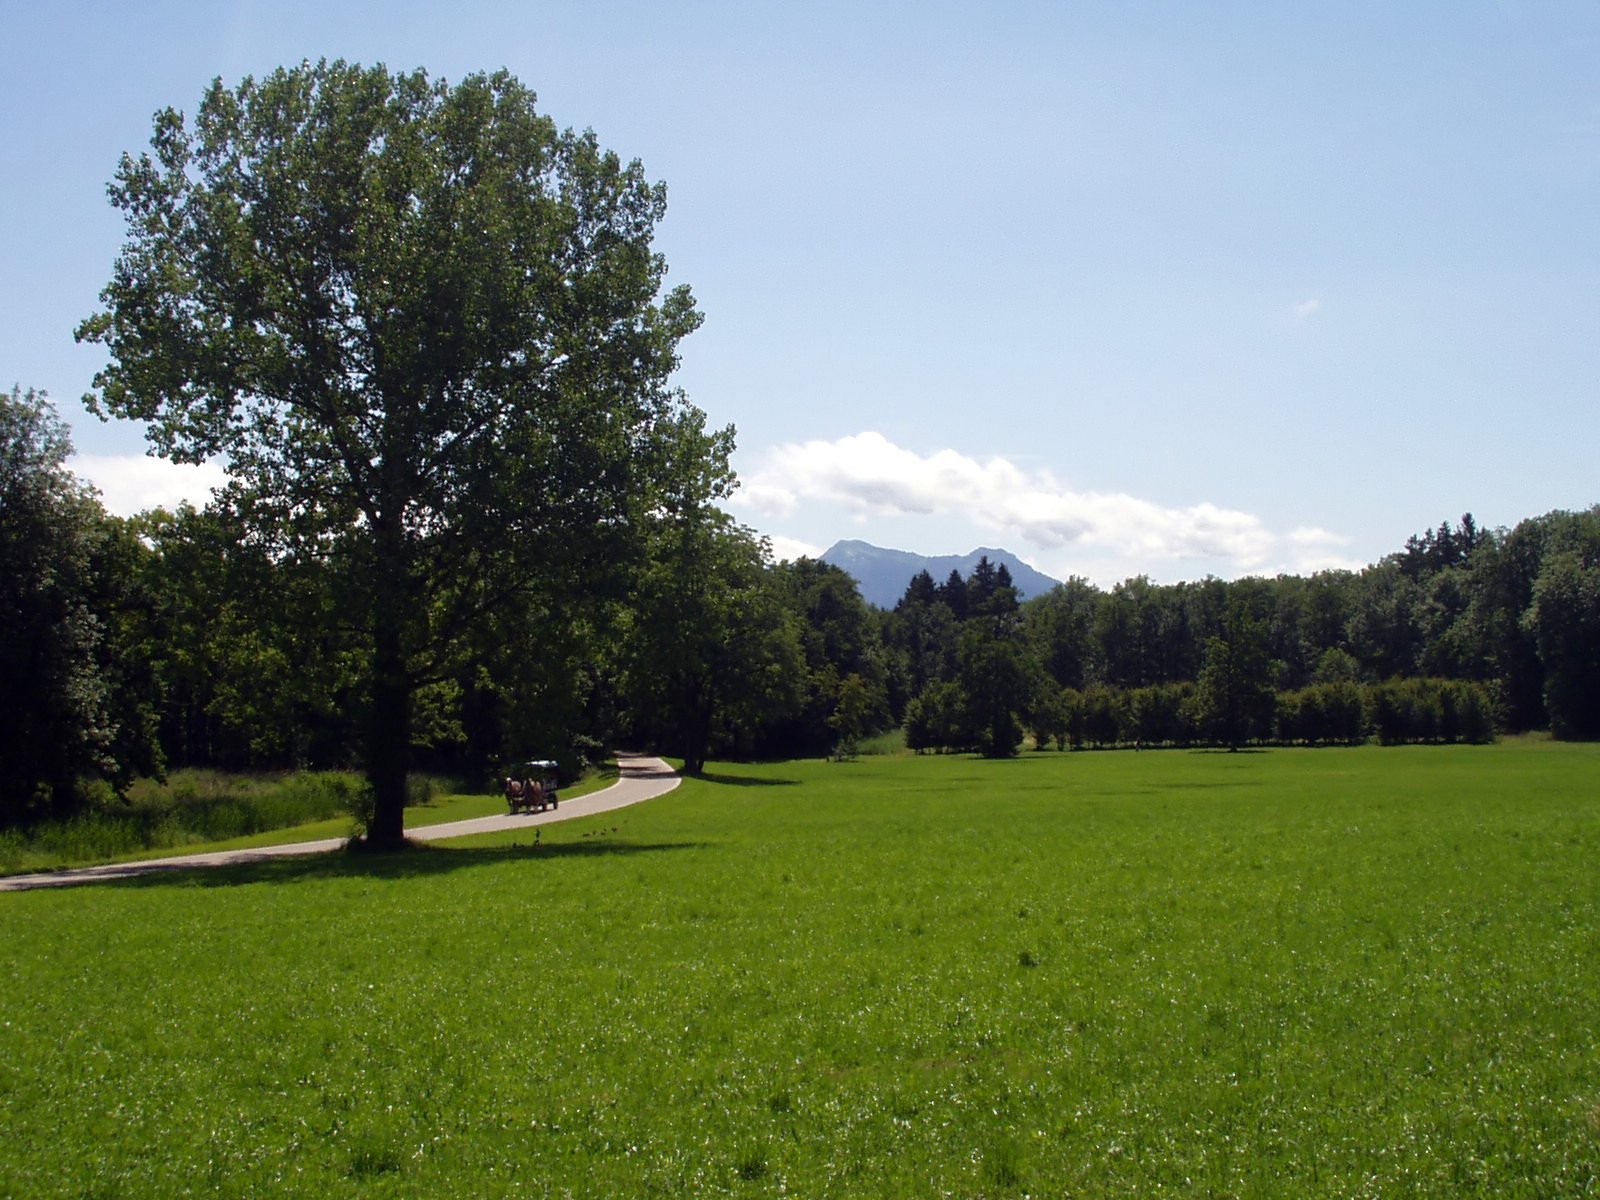 a tree on a grassy field with a dirt road in the distance